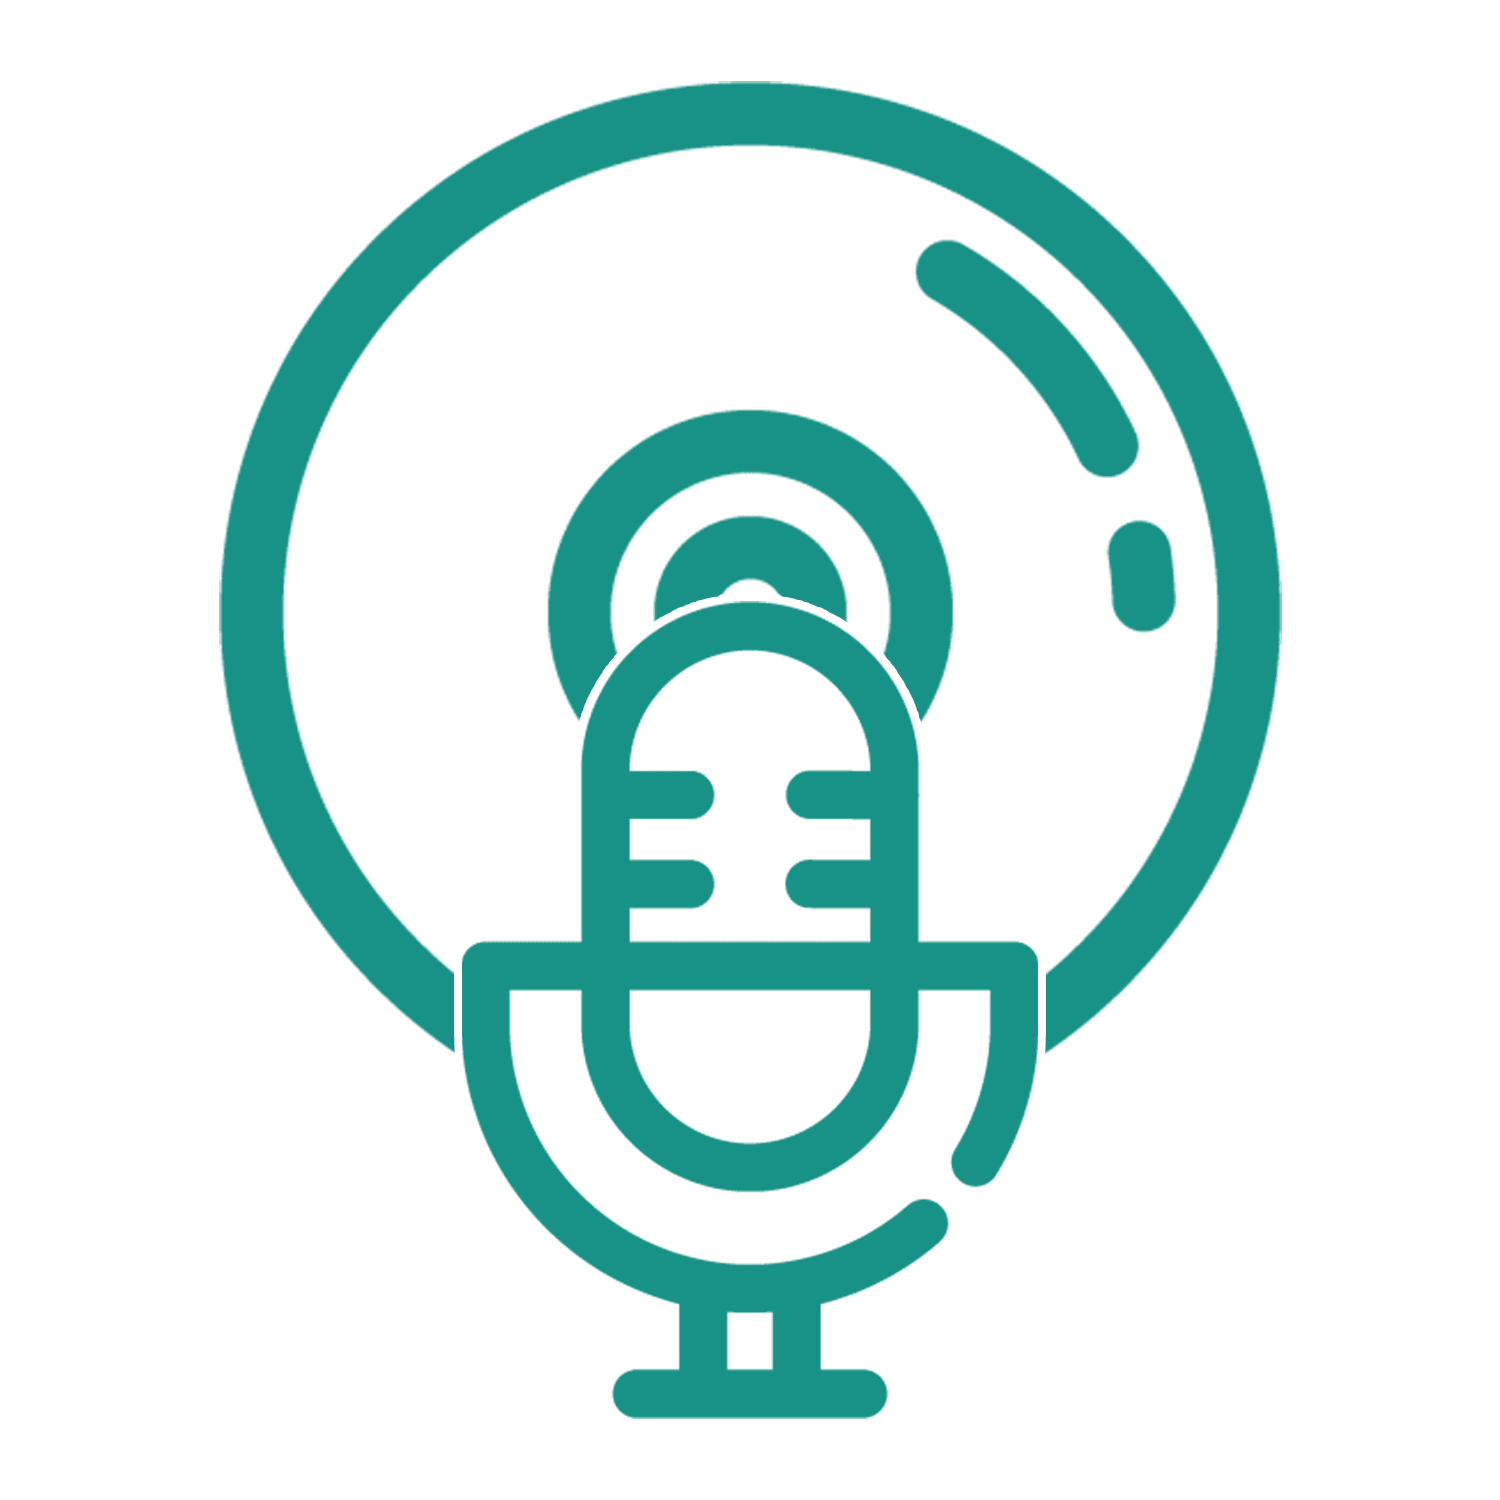 Podcasting Services Marketing in Music Industry